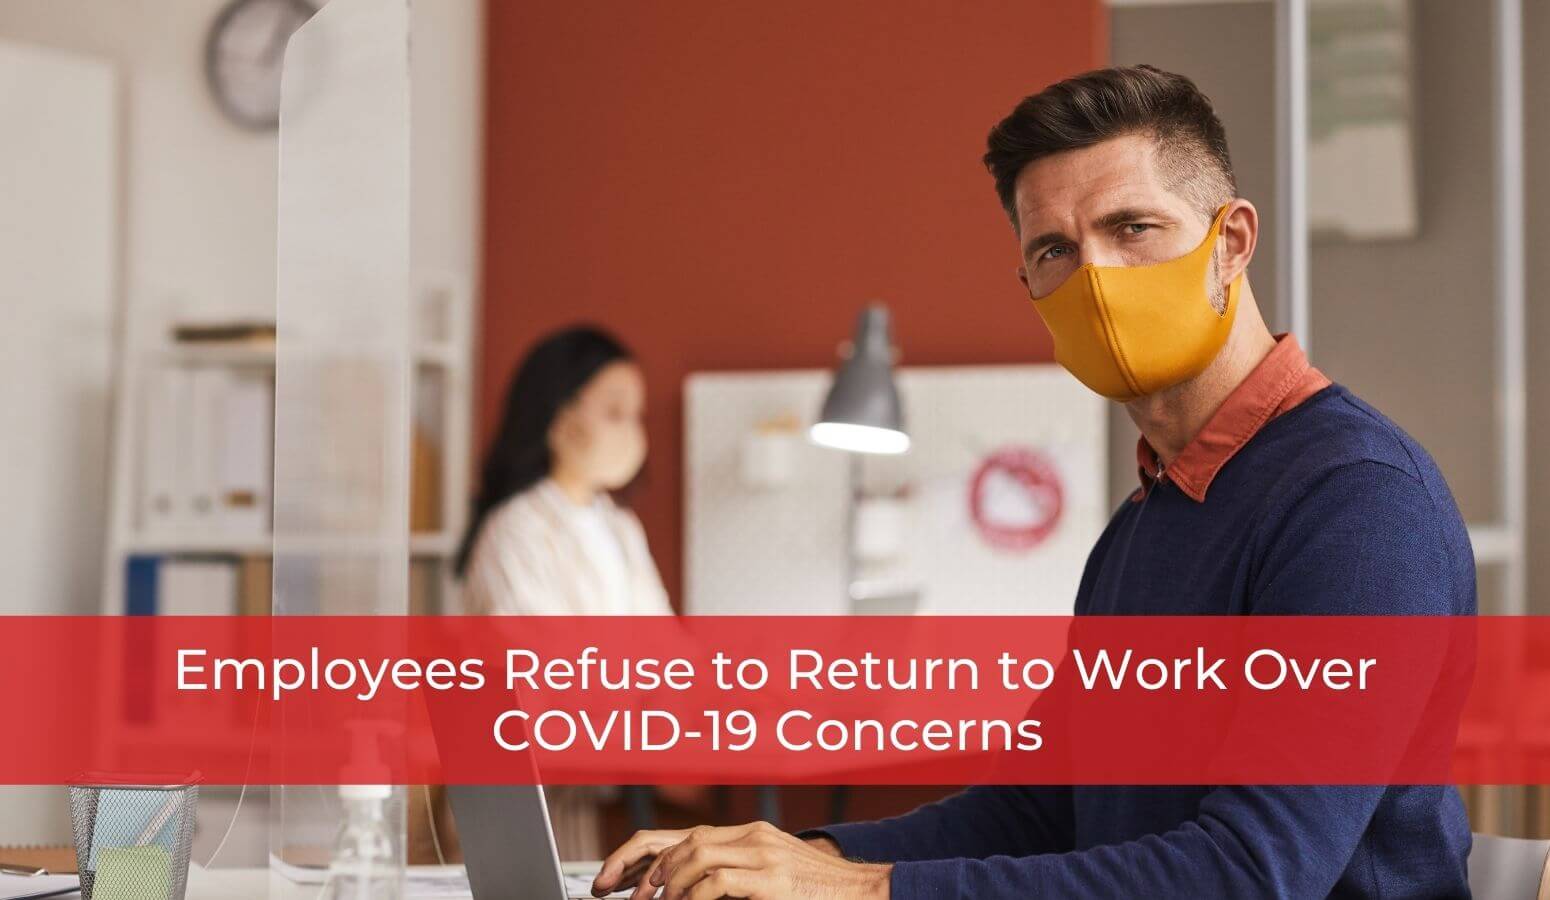 Featured image for “Employees Refuse to Return to Work Over COVID-19 Concerns”